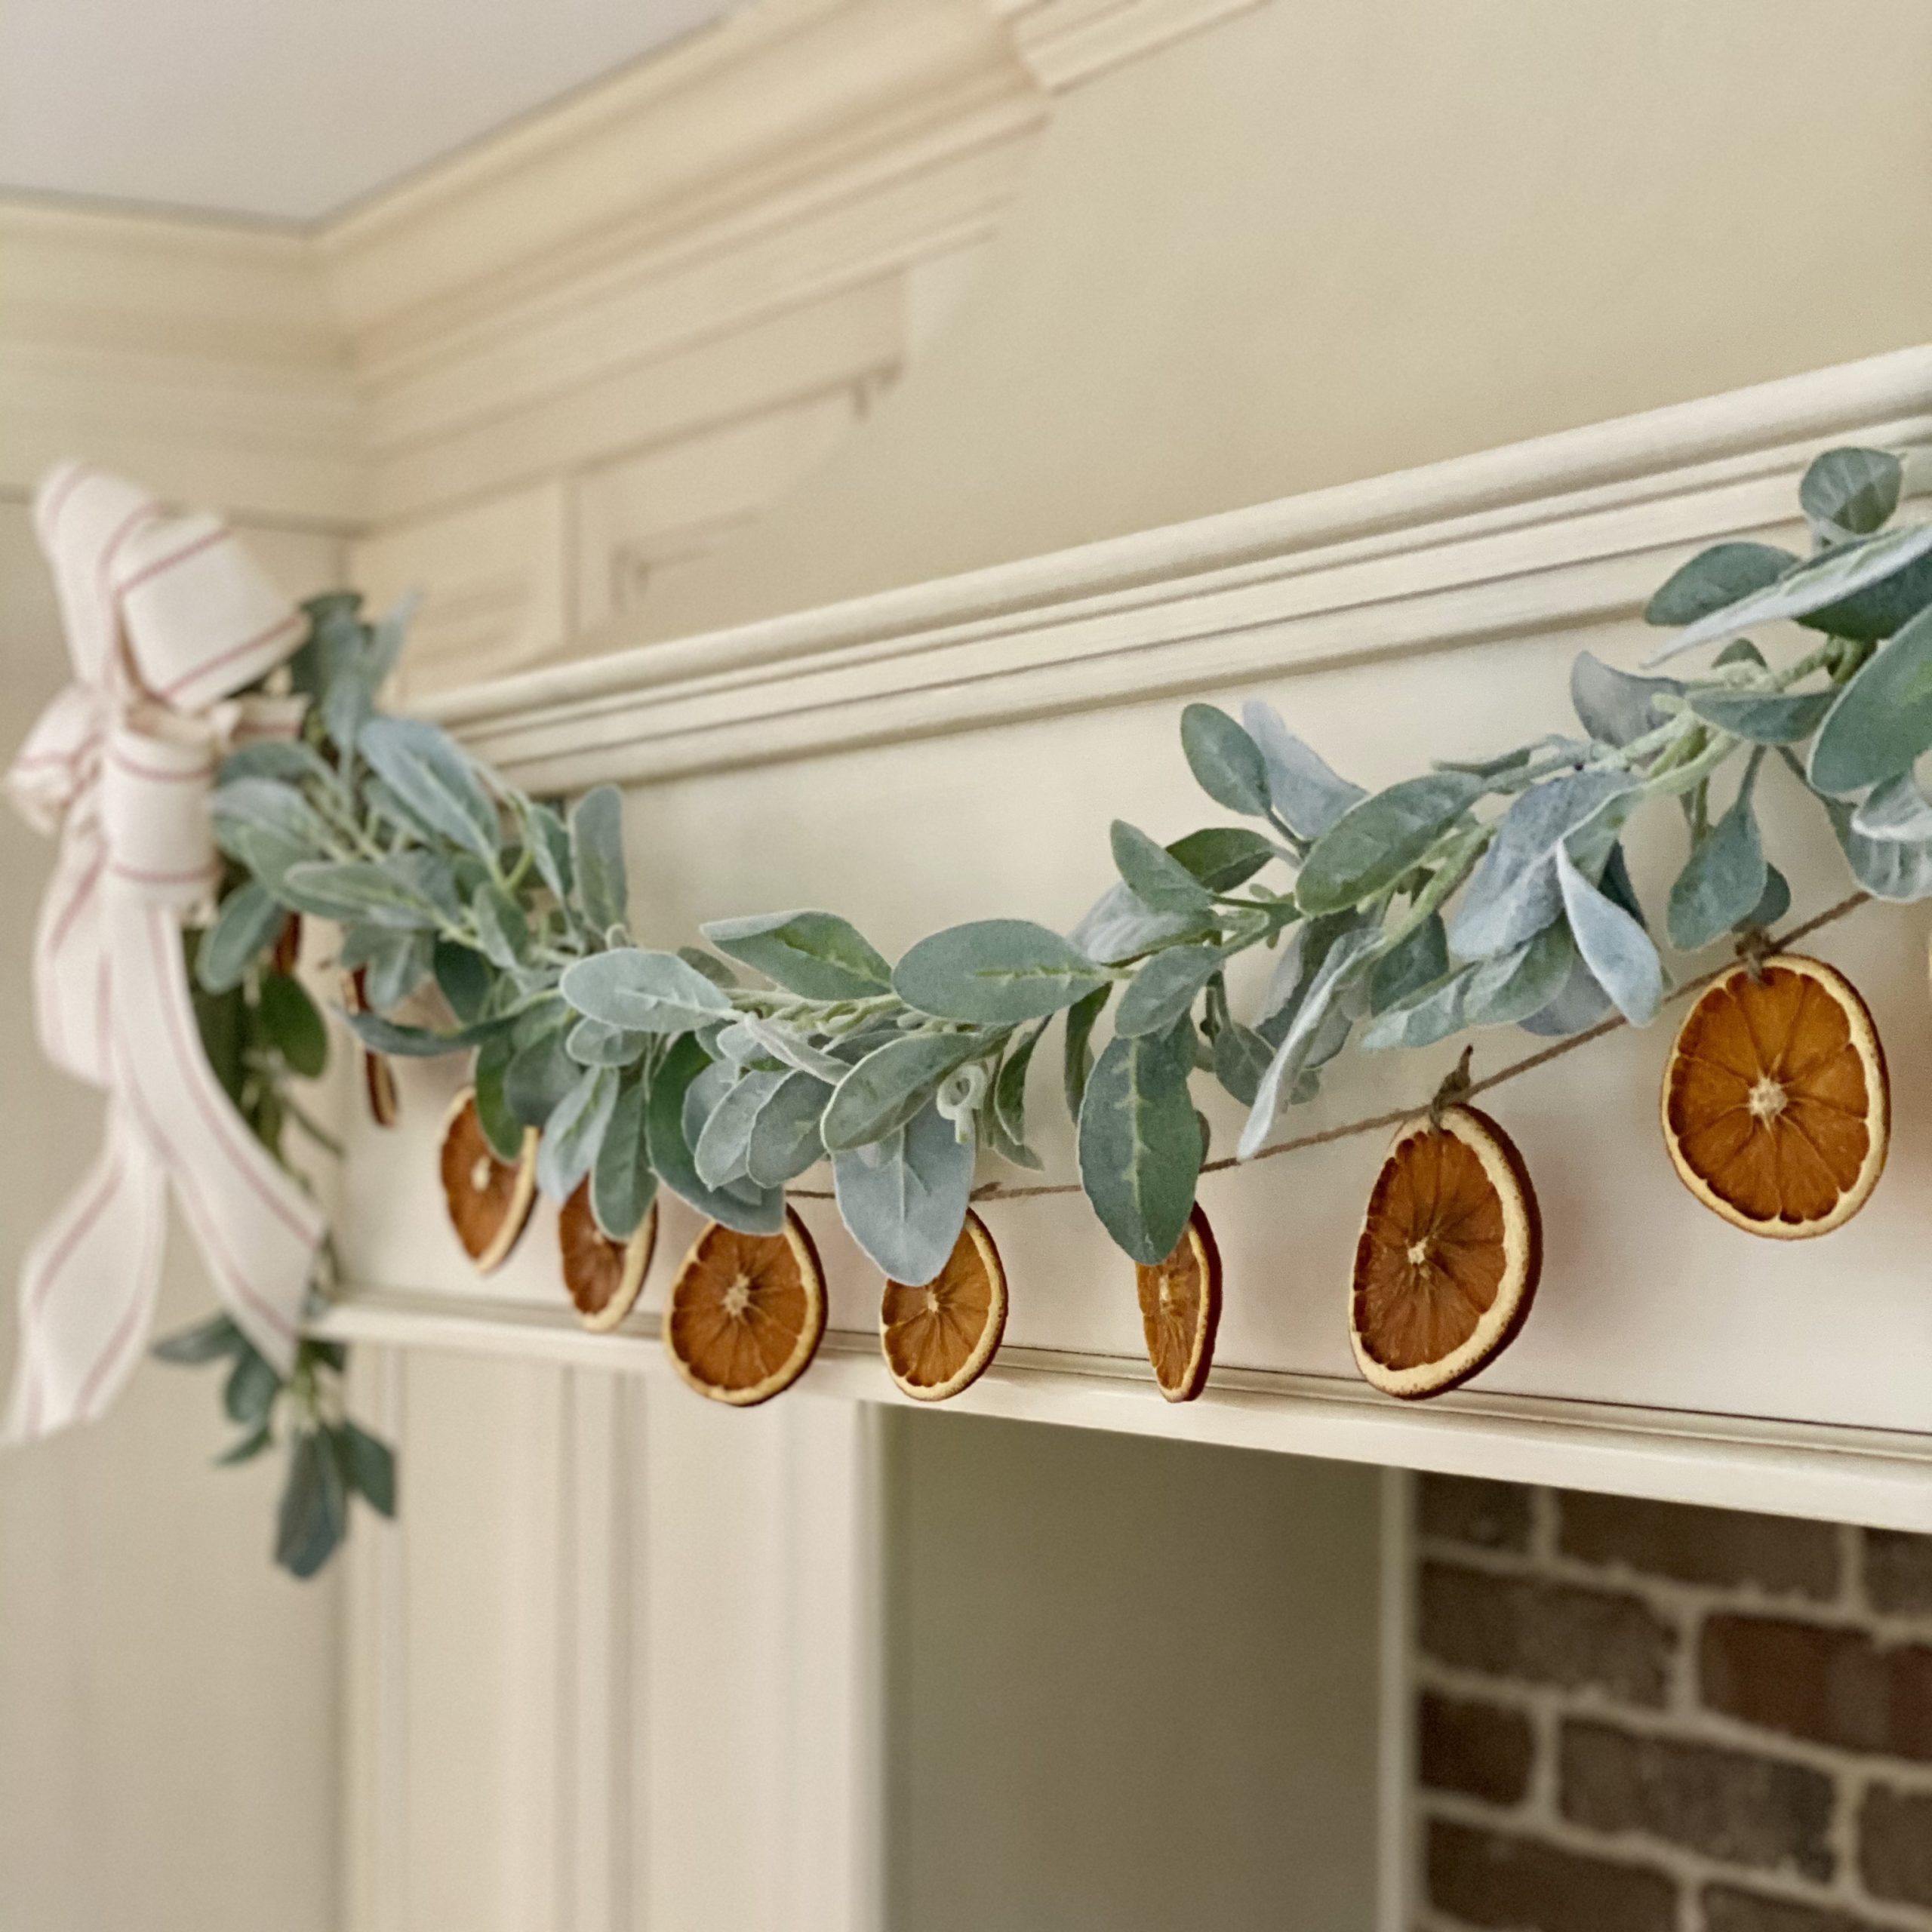 Close up of dried orange garland hanging on the hood in the kitchen over the stove.